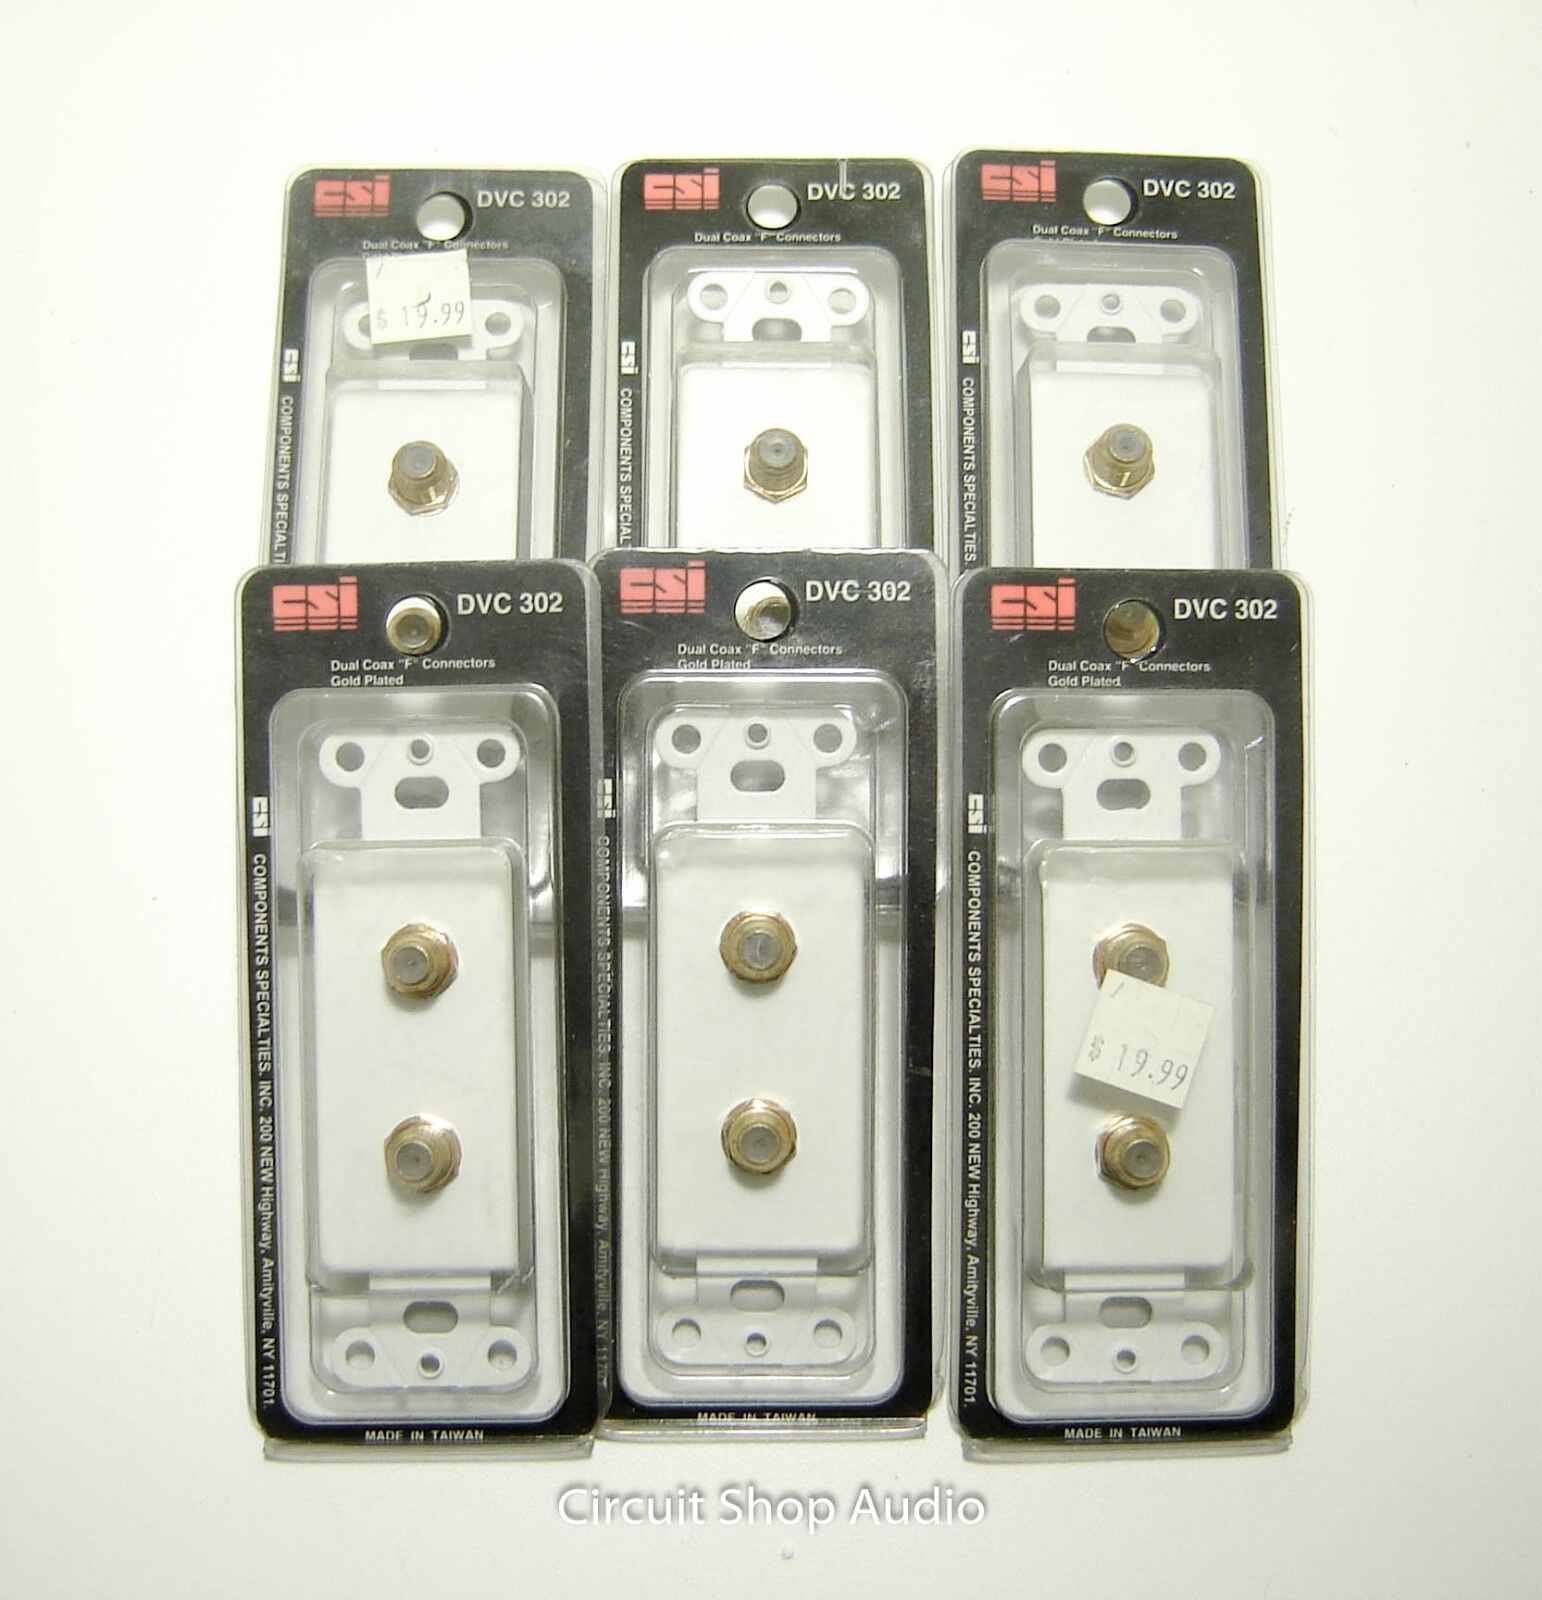 6 Pack - CSI / Speco Dual Gold F Connector Wall Plate Insert / DVC302